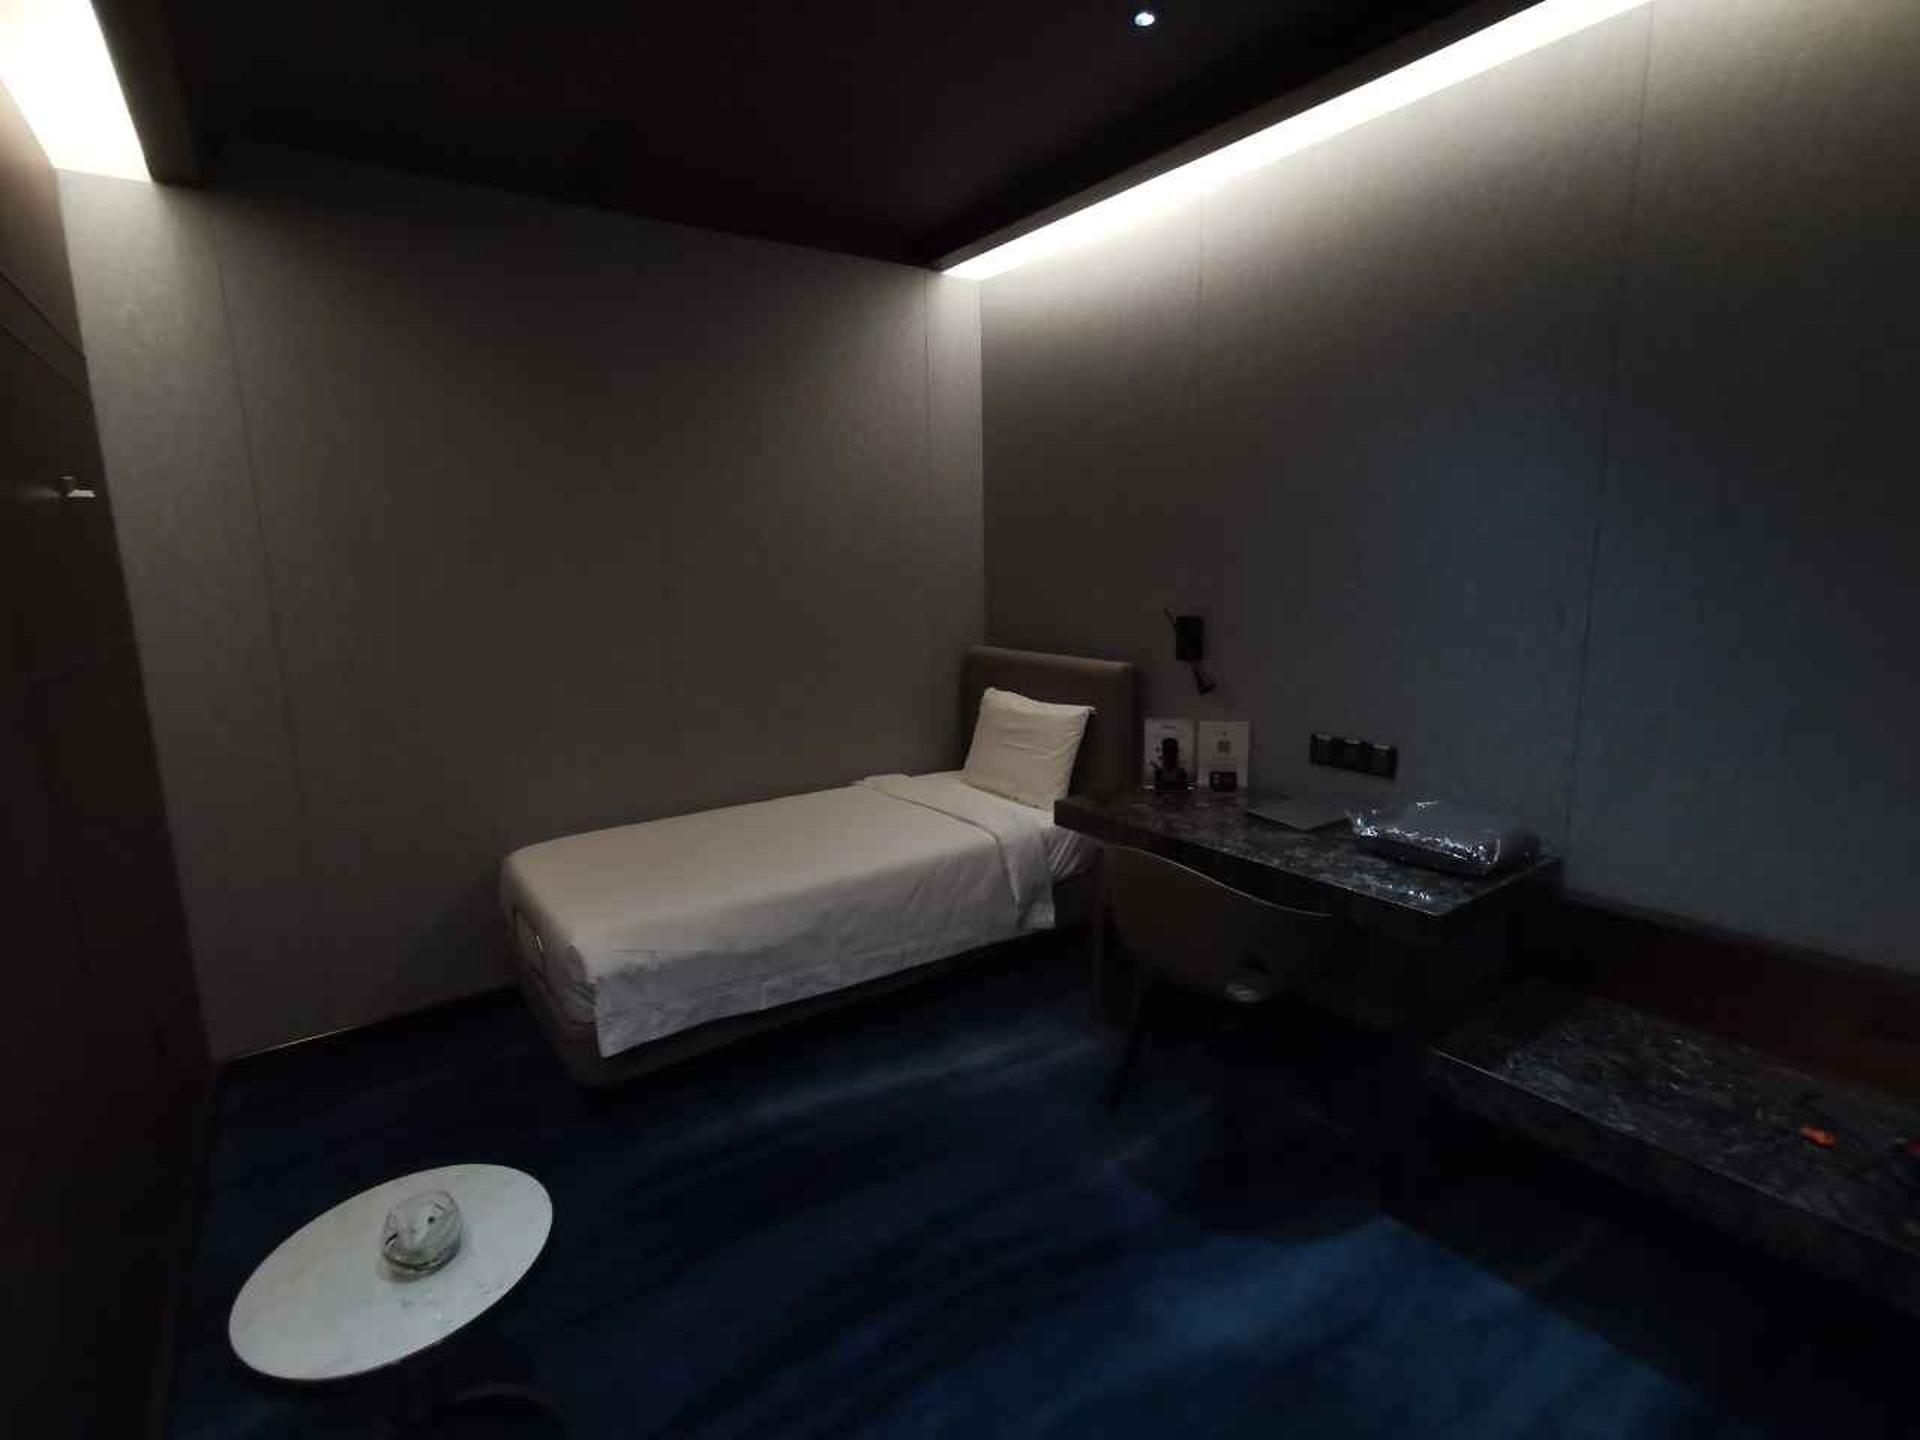 Singapore Airlines The Private Room image 1 of 4